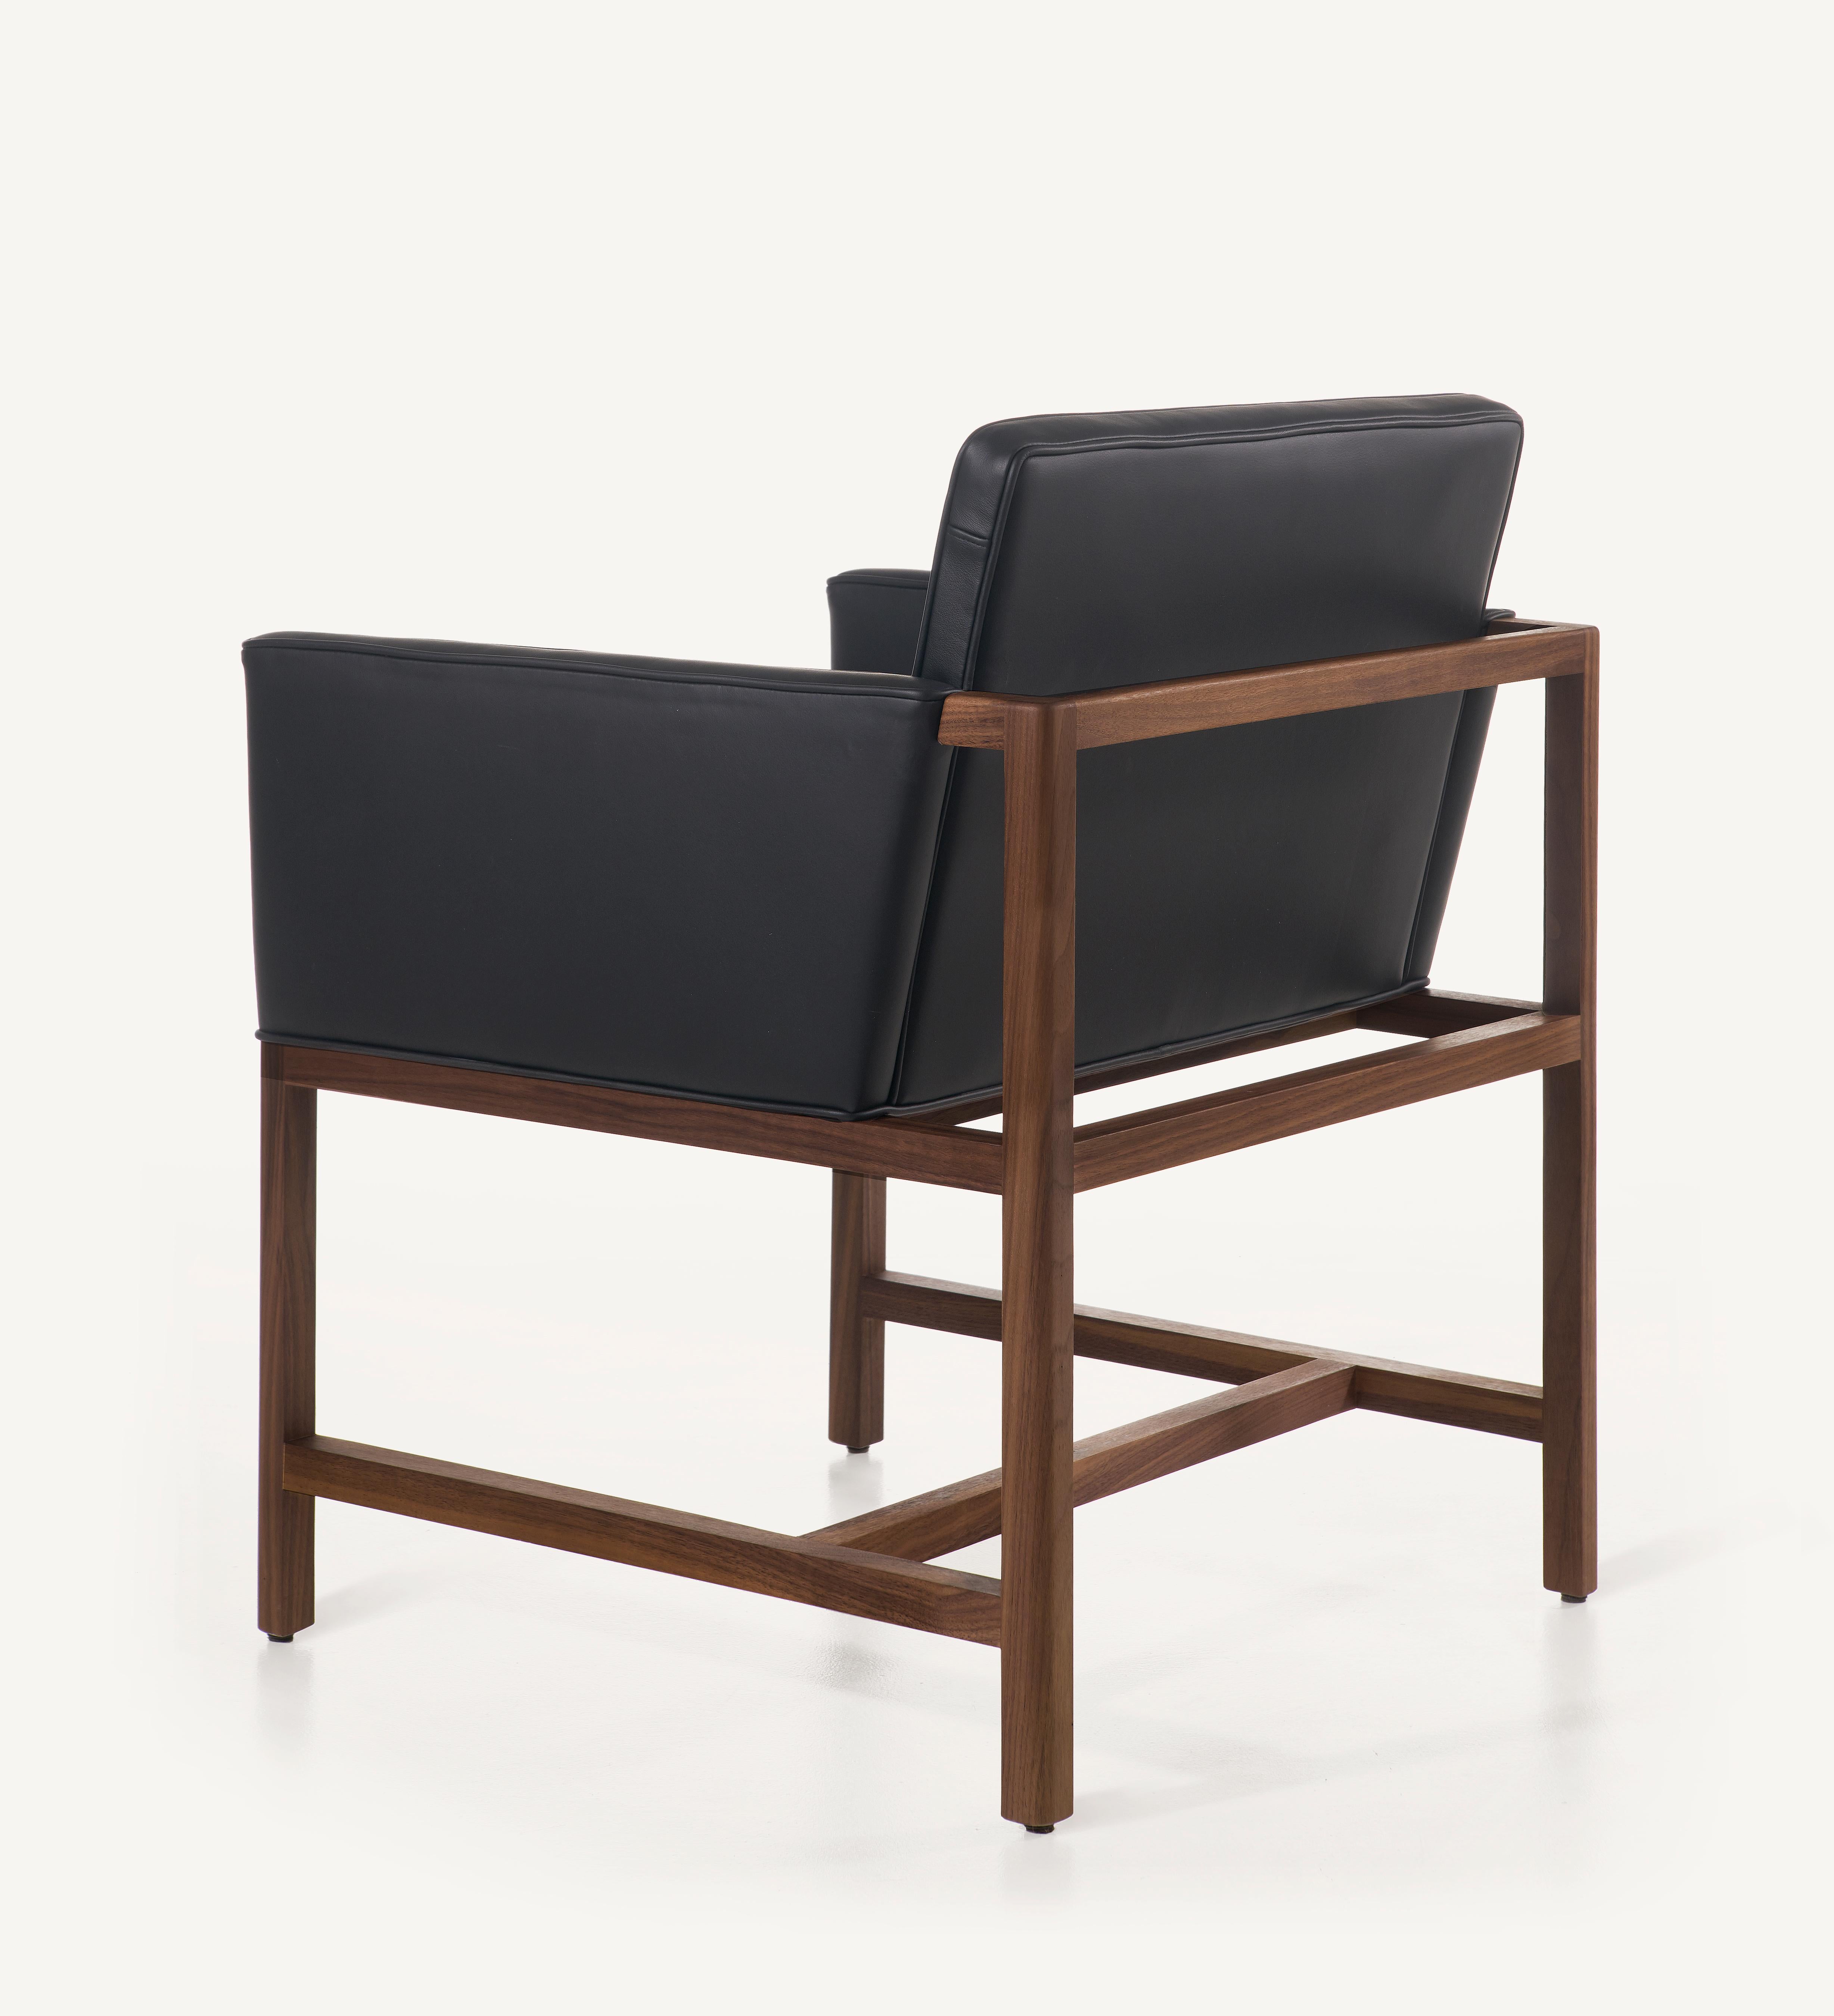 For Sale: Black (Comfort 99991 Black) Wood Frame Armchair in Solid Walnut and Leather Designed by Craig Bassam 2